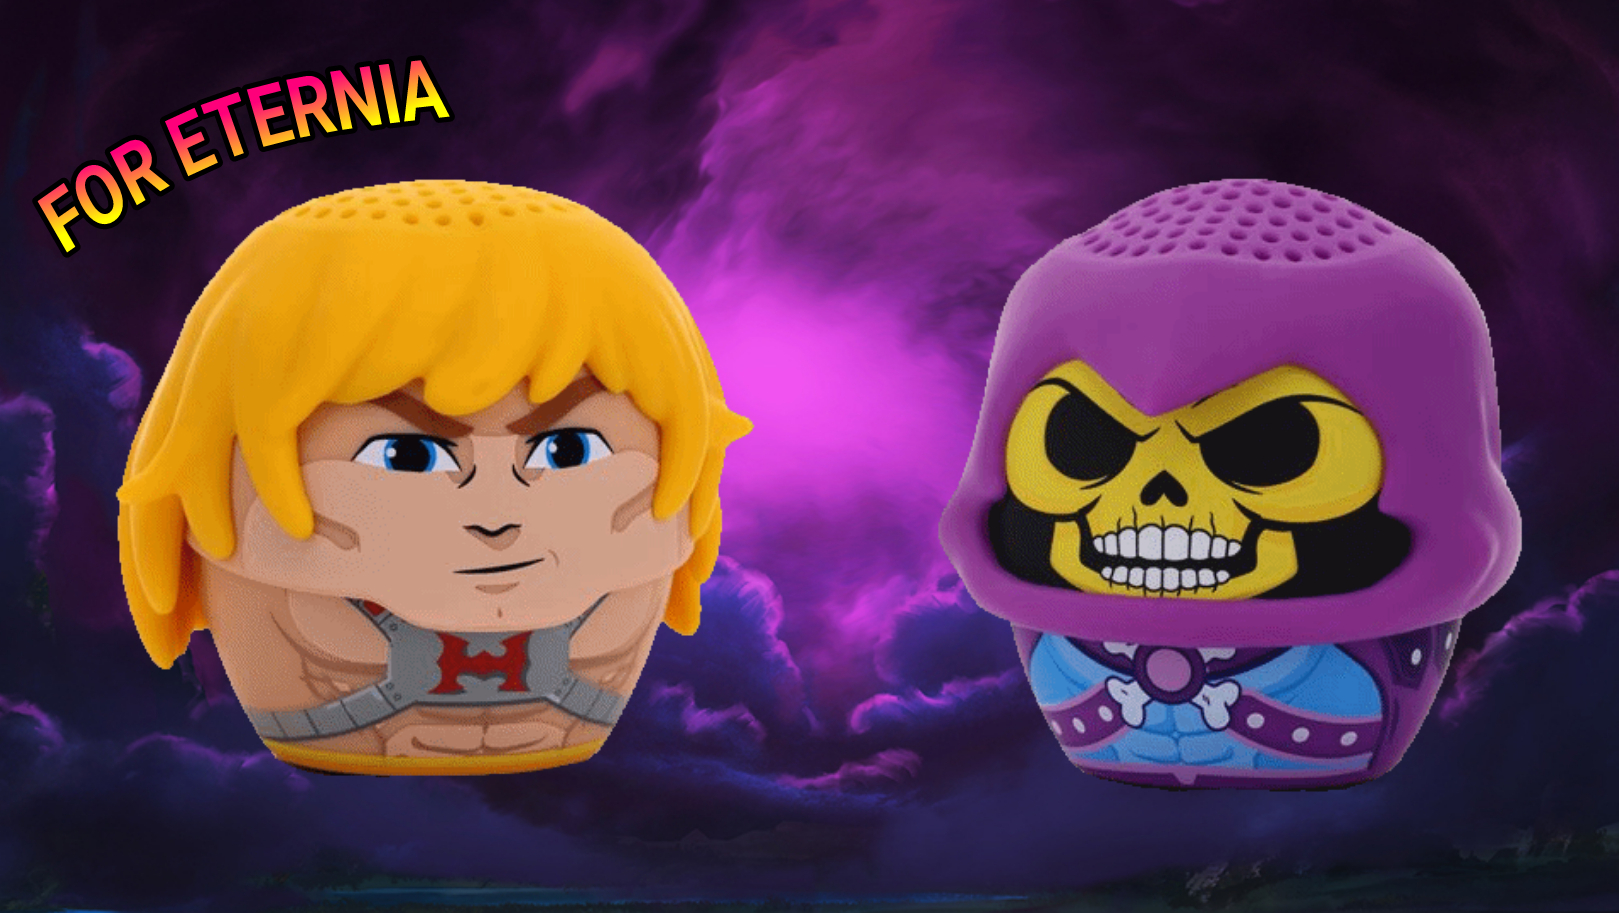 ”Masters of the Universe: Revelation” Bitty Boomers Bluetooth Mini Speakers available for pre-order